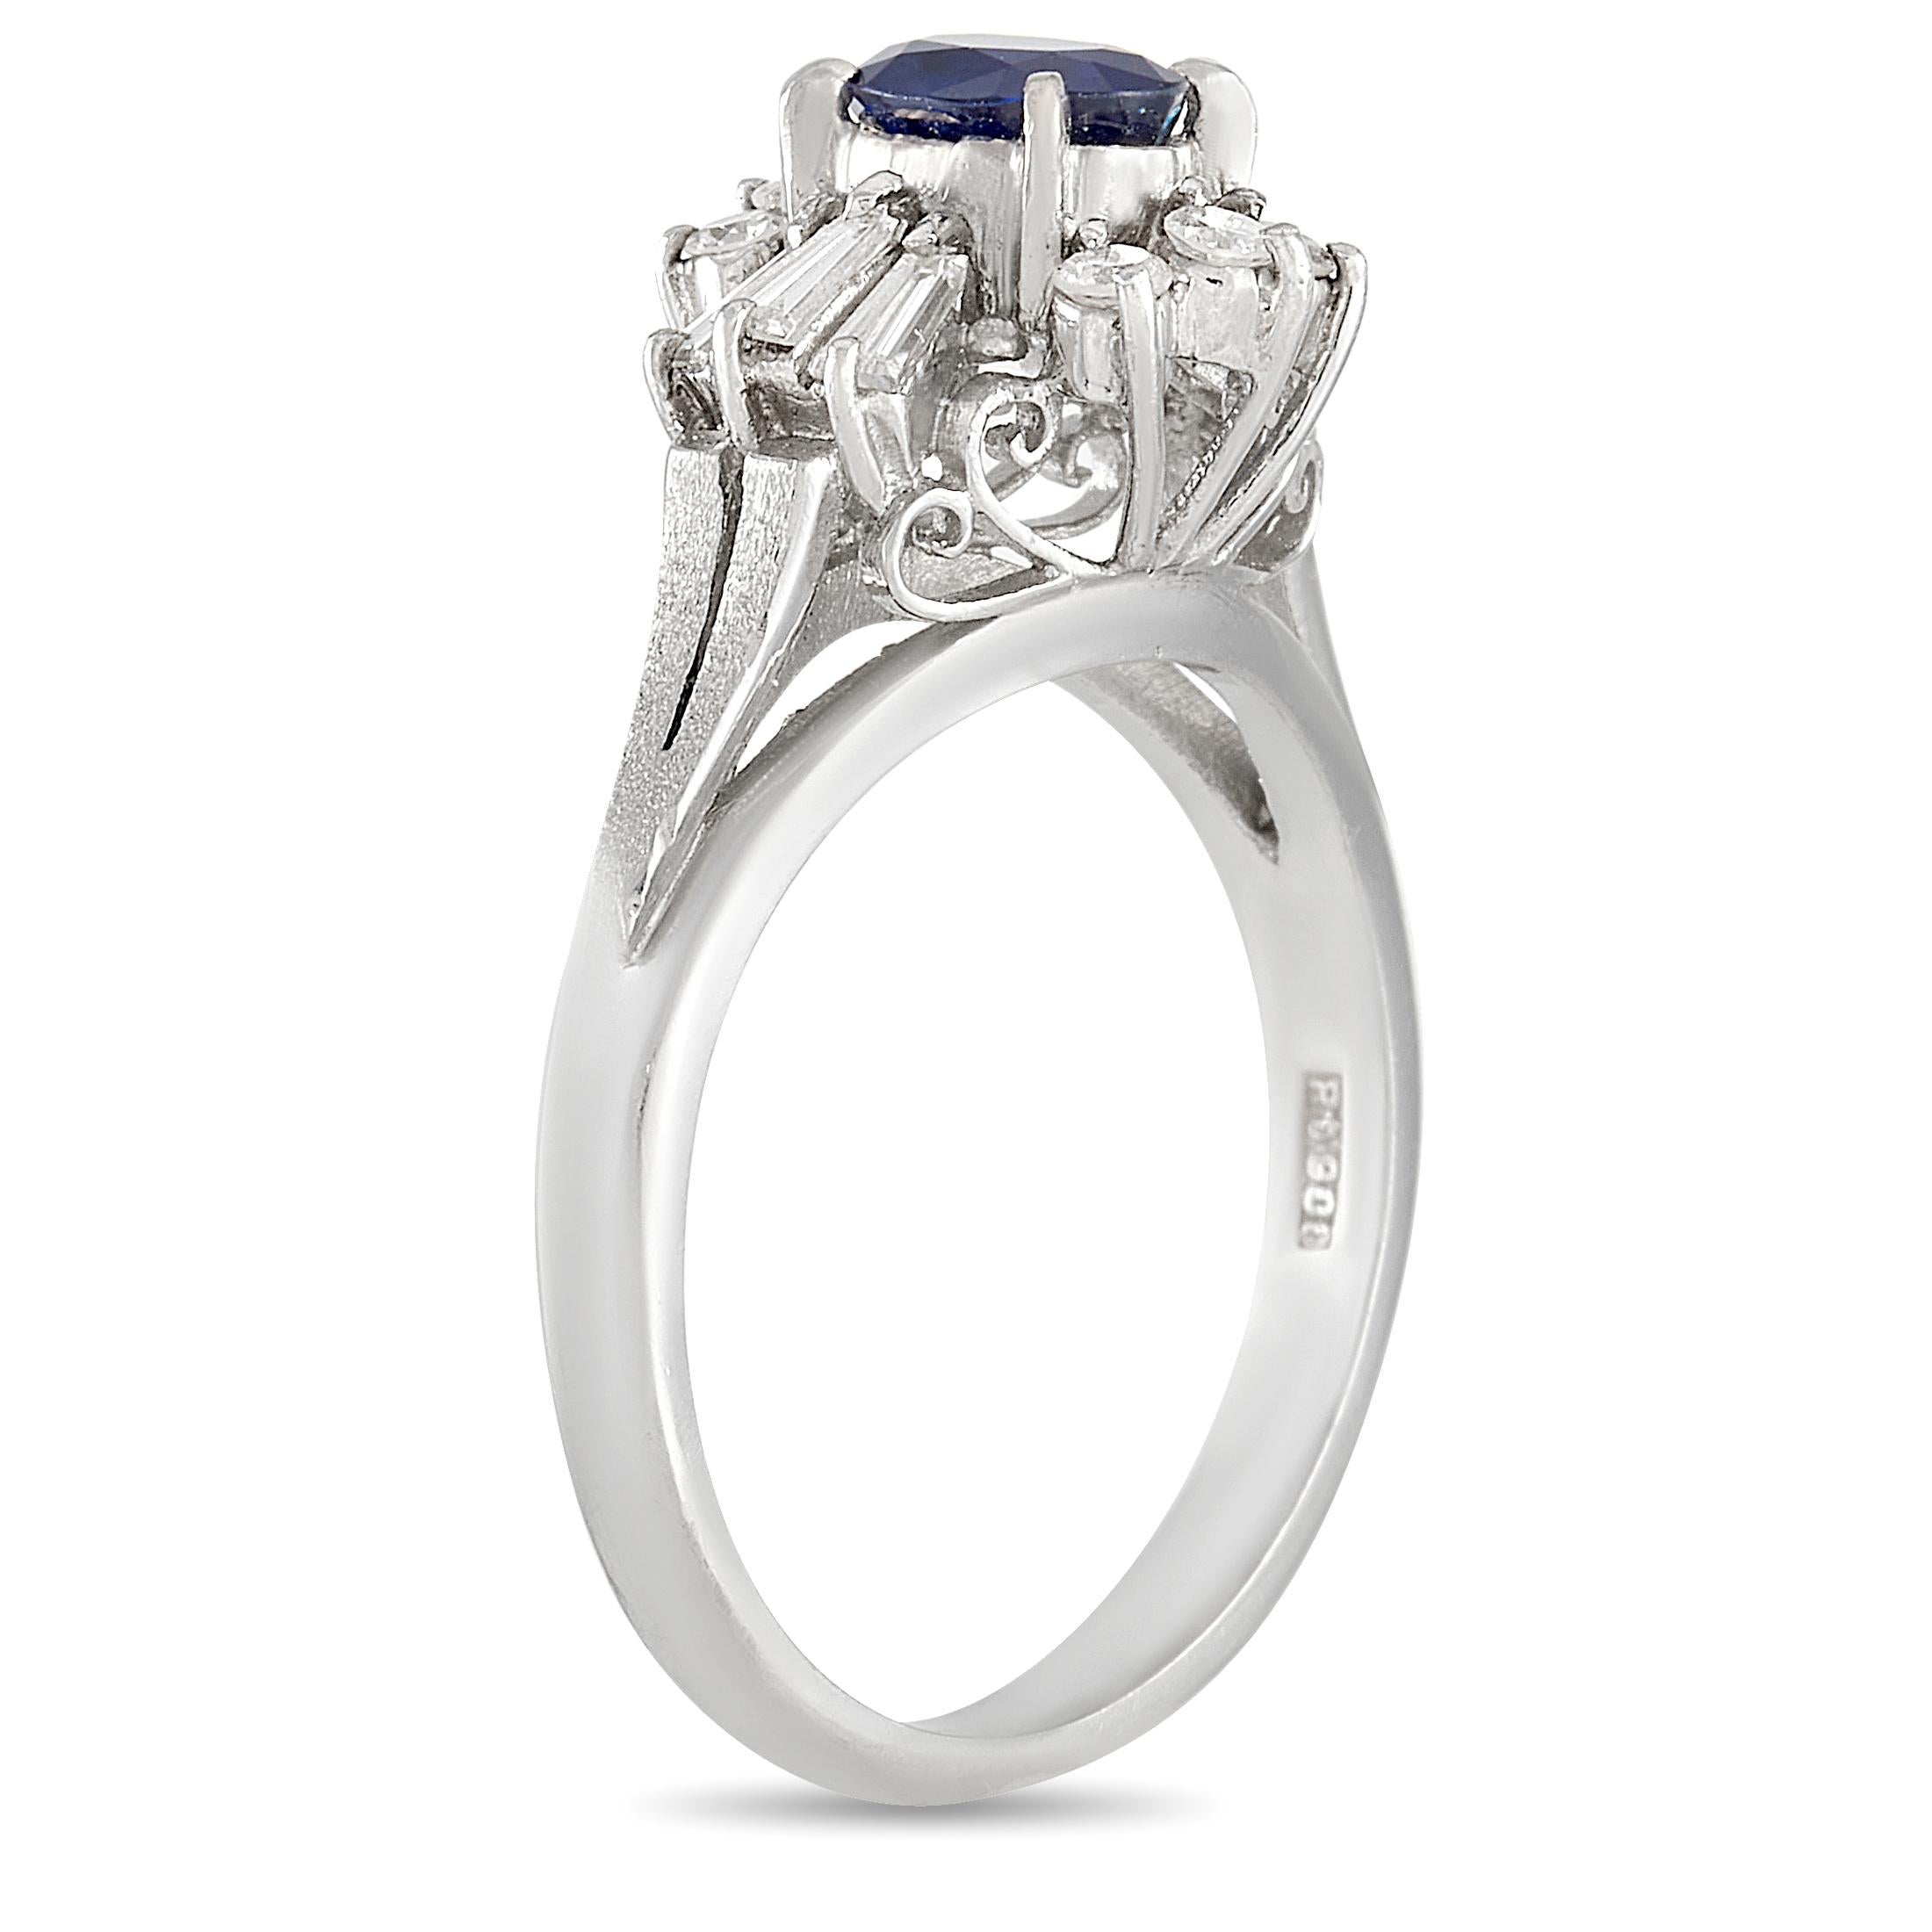 Equal parts classic and contemporary, this luxury Platinum ring has an undeniable elegance. It features a breathtaking oval-cut 0.76 carat sapphire surrounded by a sunburst halo of diamonds totaling 0.45 carats. It features a dainty 2mm band and an